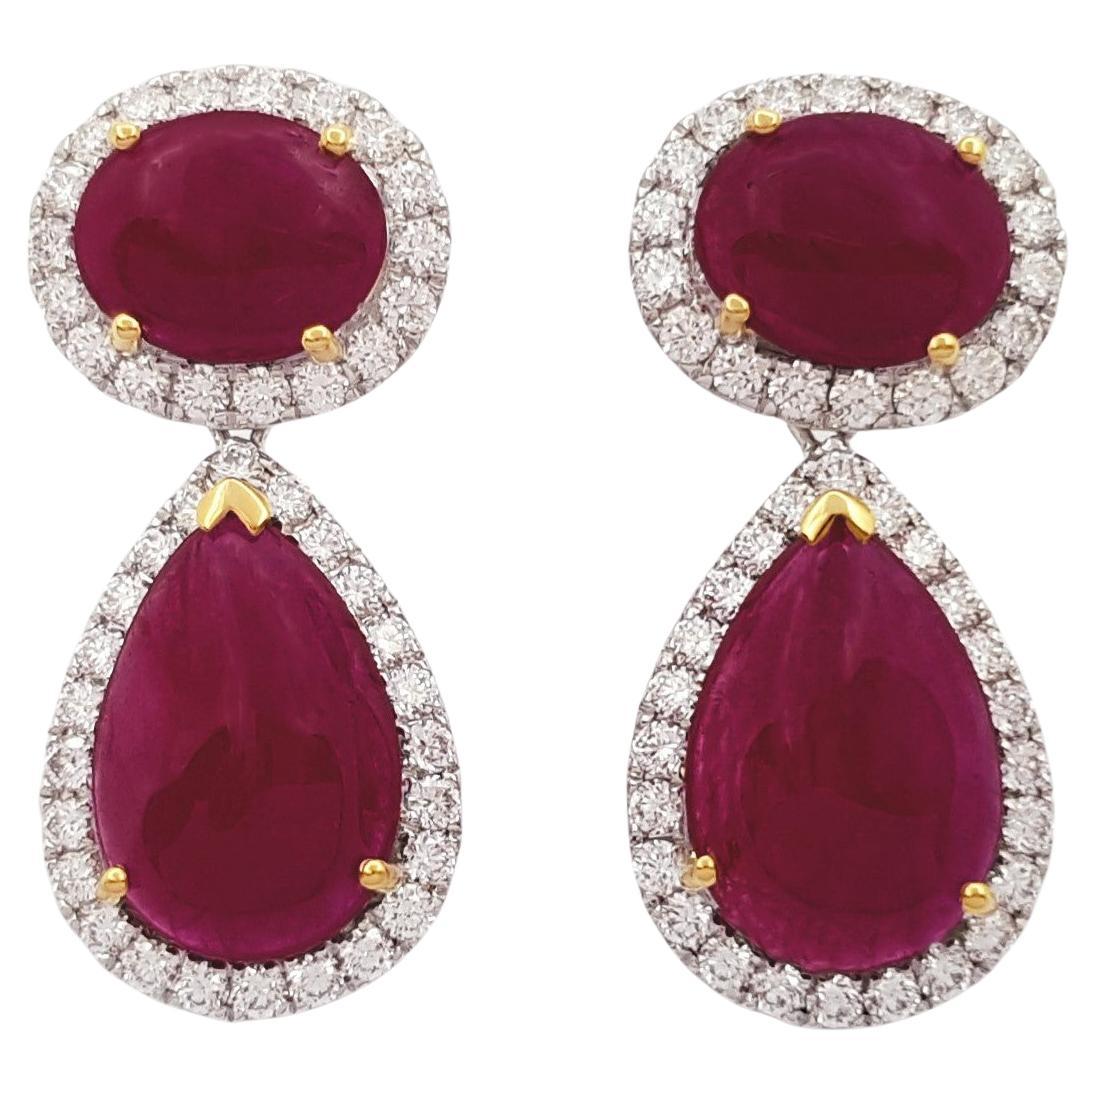 Cabochon Ruby with Diamond Earrings set in 18K White Gold Settings For Sale